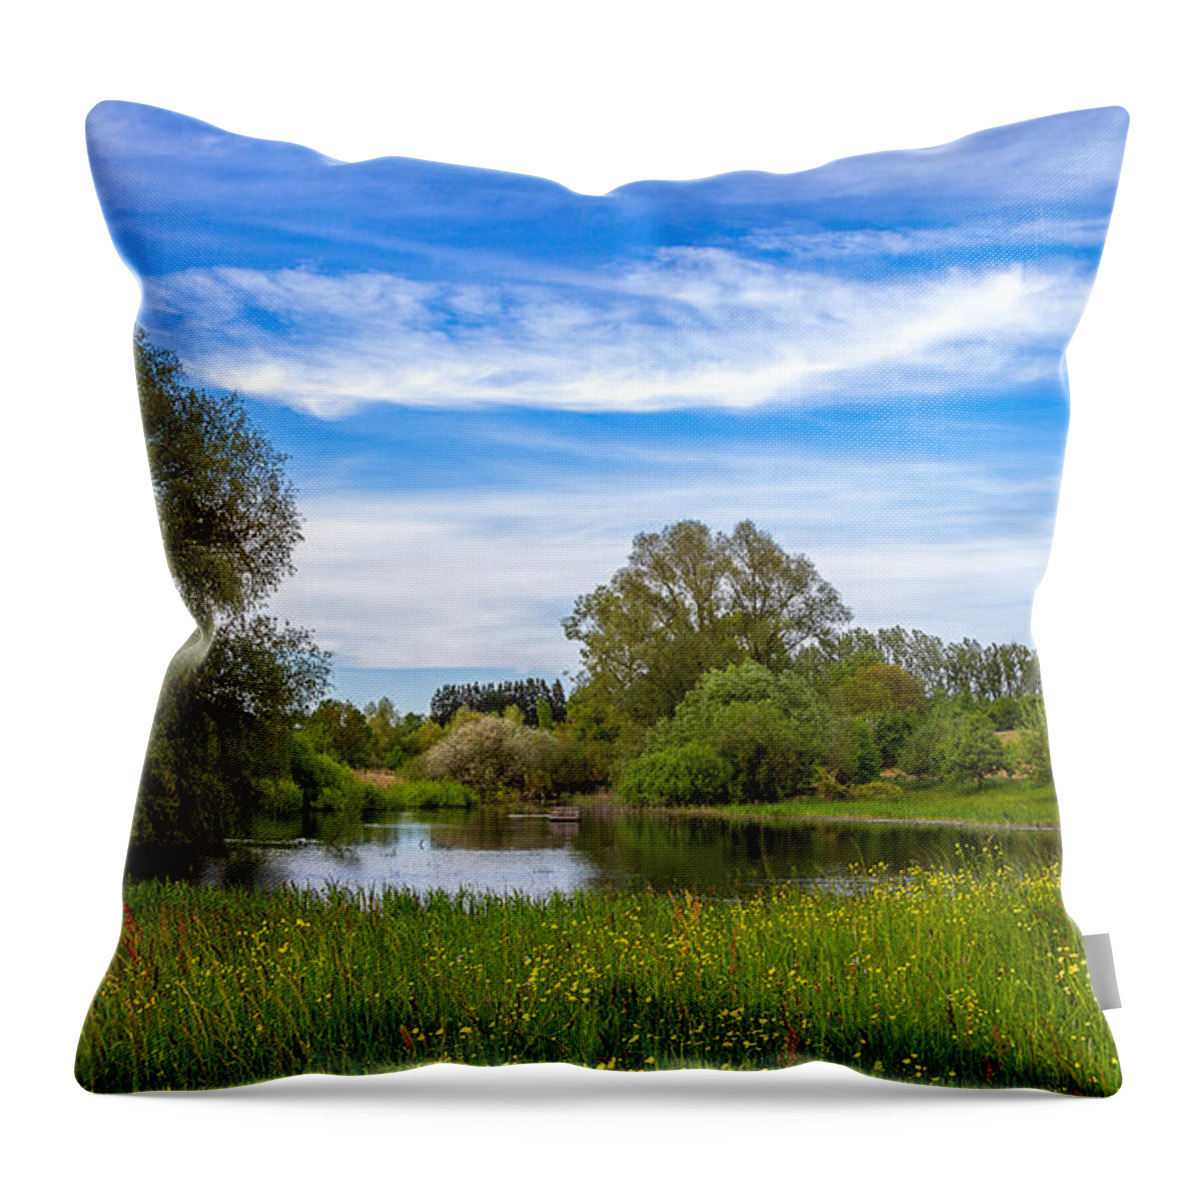 Nature-preserve Throw Pillow featuring the photograph Nature Preserve Segete by Bernd Laeschke